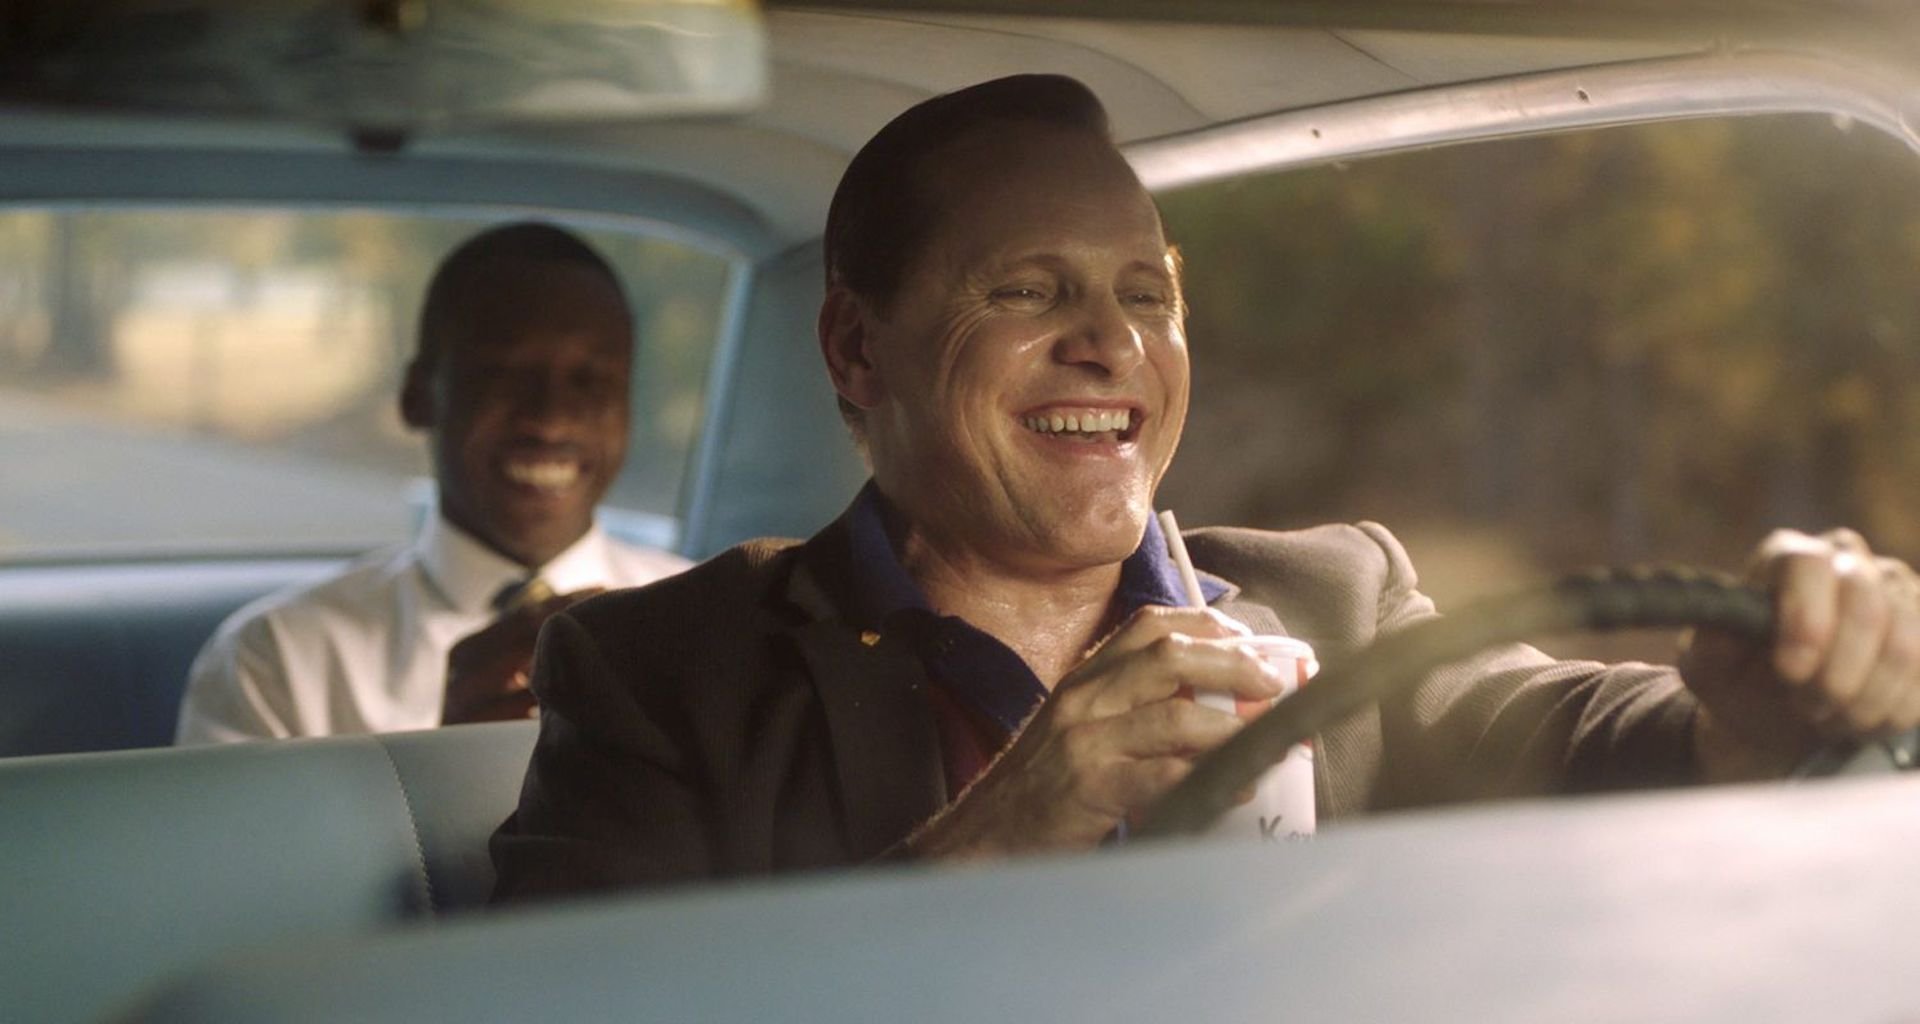 Tony Lip (Viggo Mortensen) laughing and driving with Dr. Don Shirley (Mahershala Ali) in the backseat in 'Green Book'